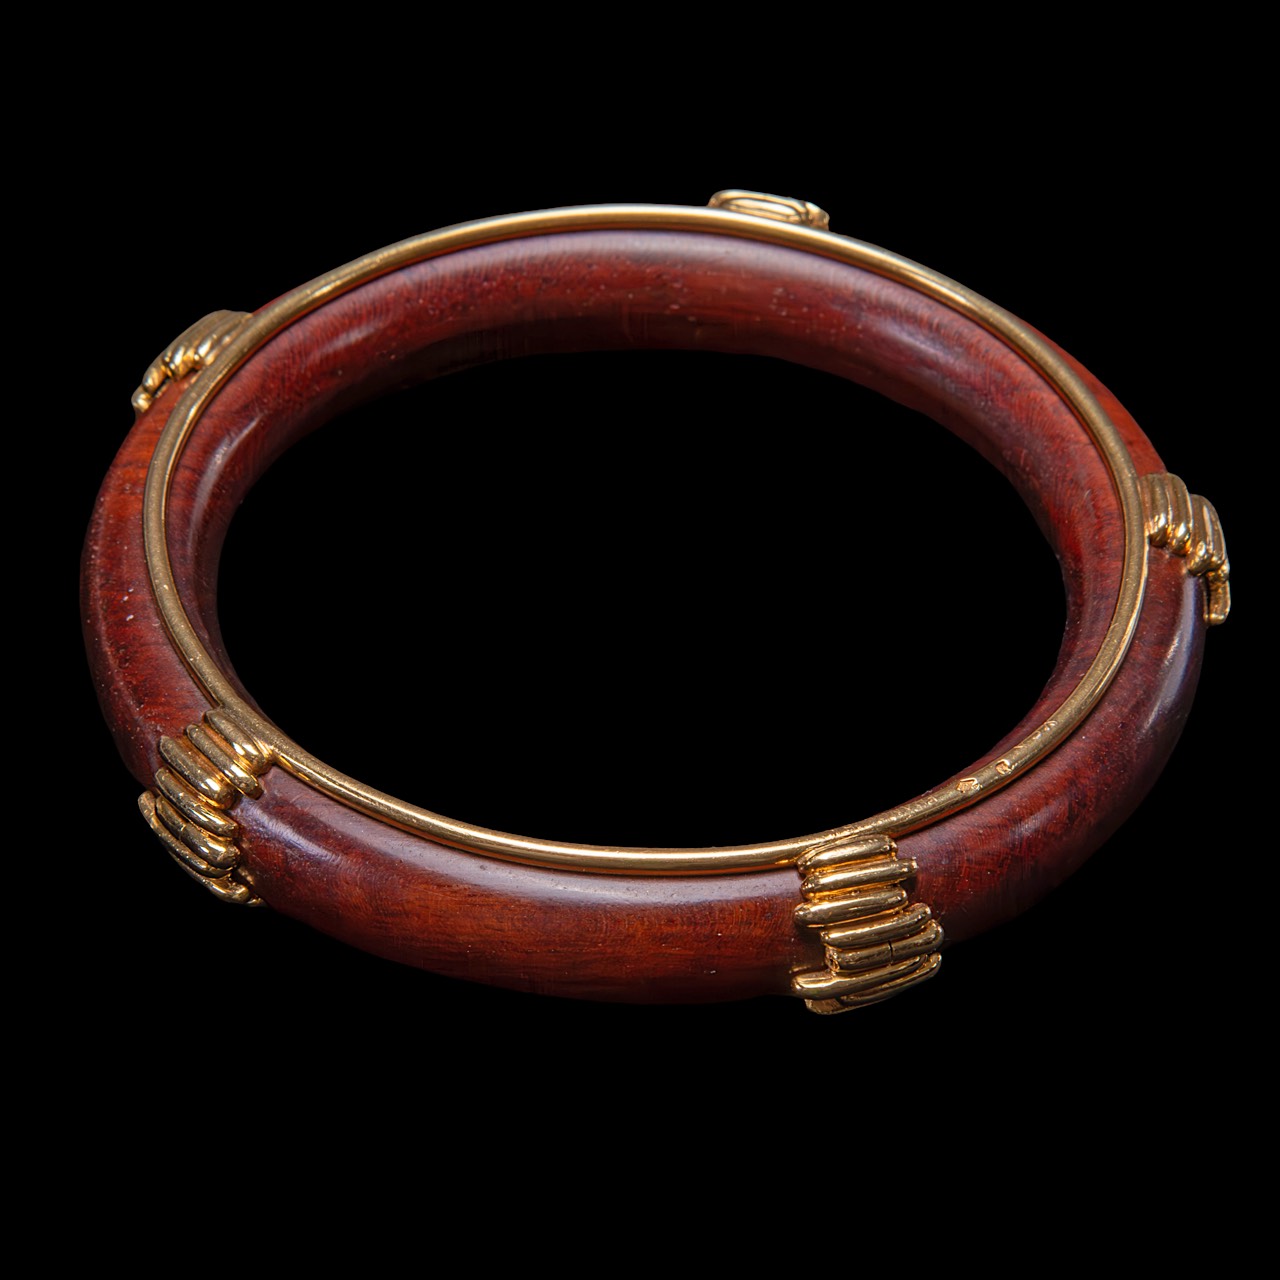 Van Cleef & Arpels, a wood and gold bangle bracelet, 18ct gold, signed VCA, Inner circumference 20 c - Image 7 of 7